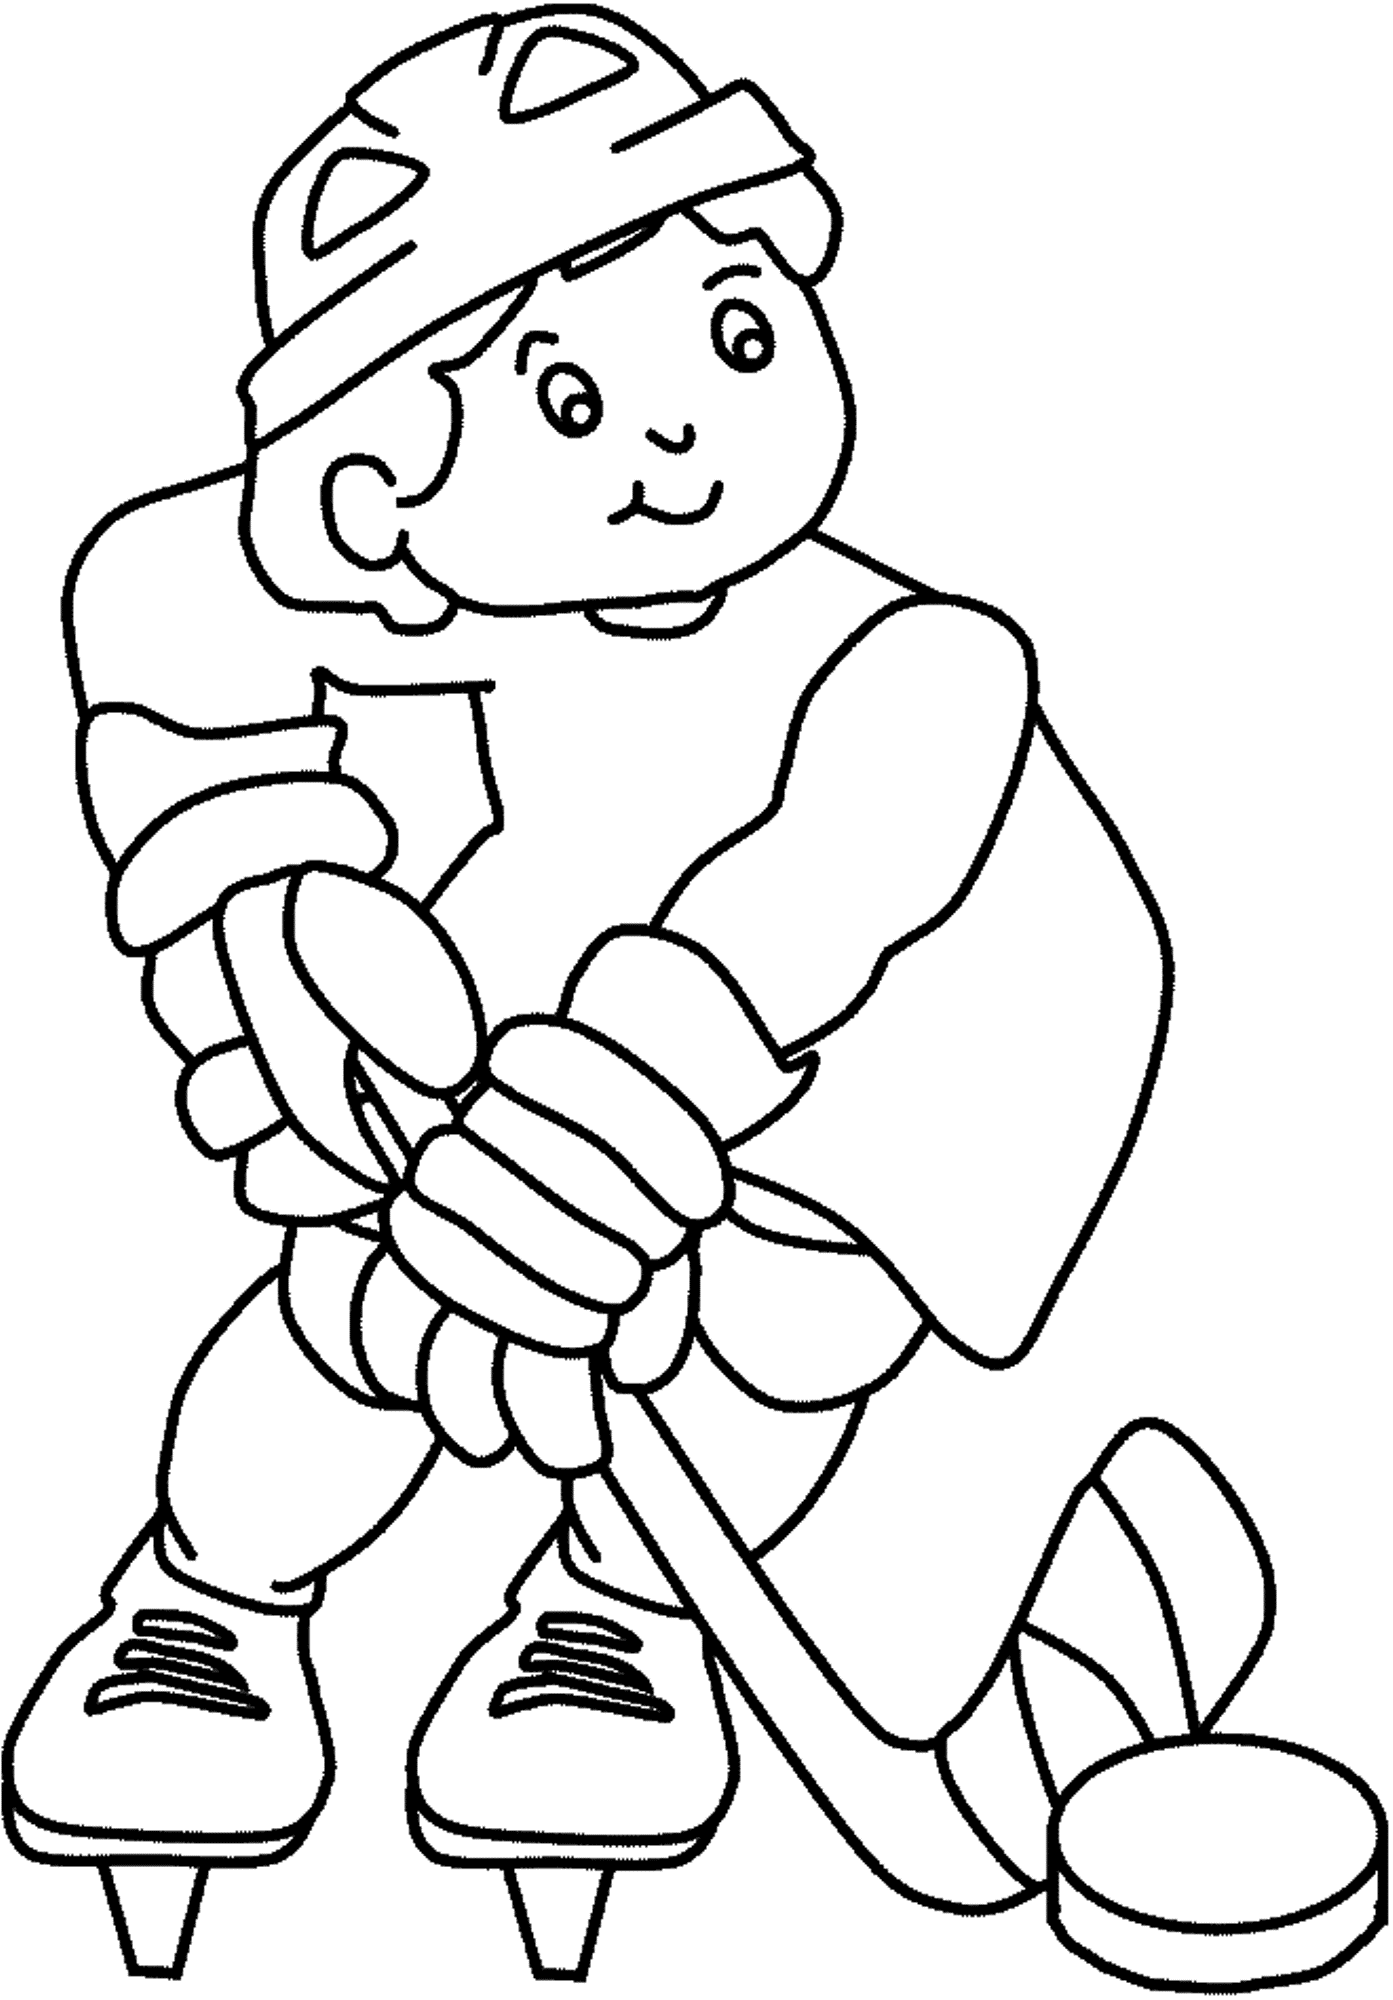 Hockey For Kids Coloring Page